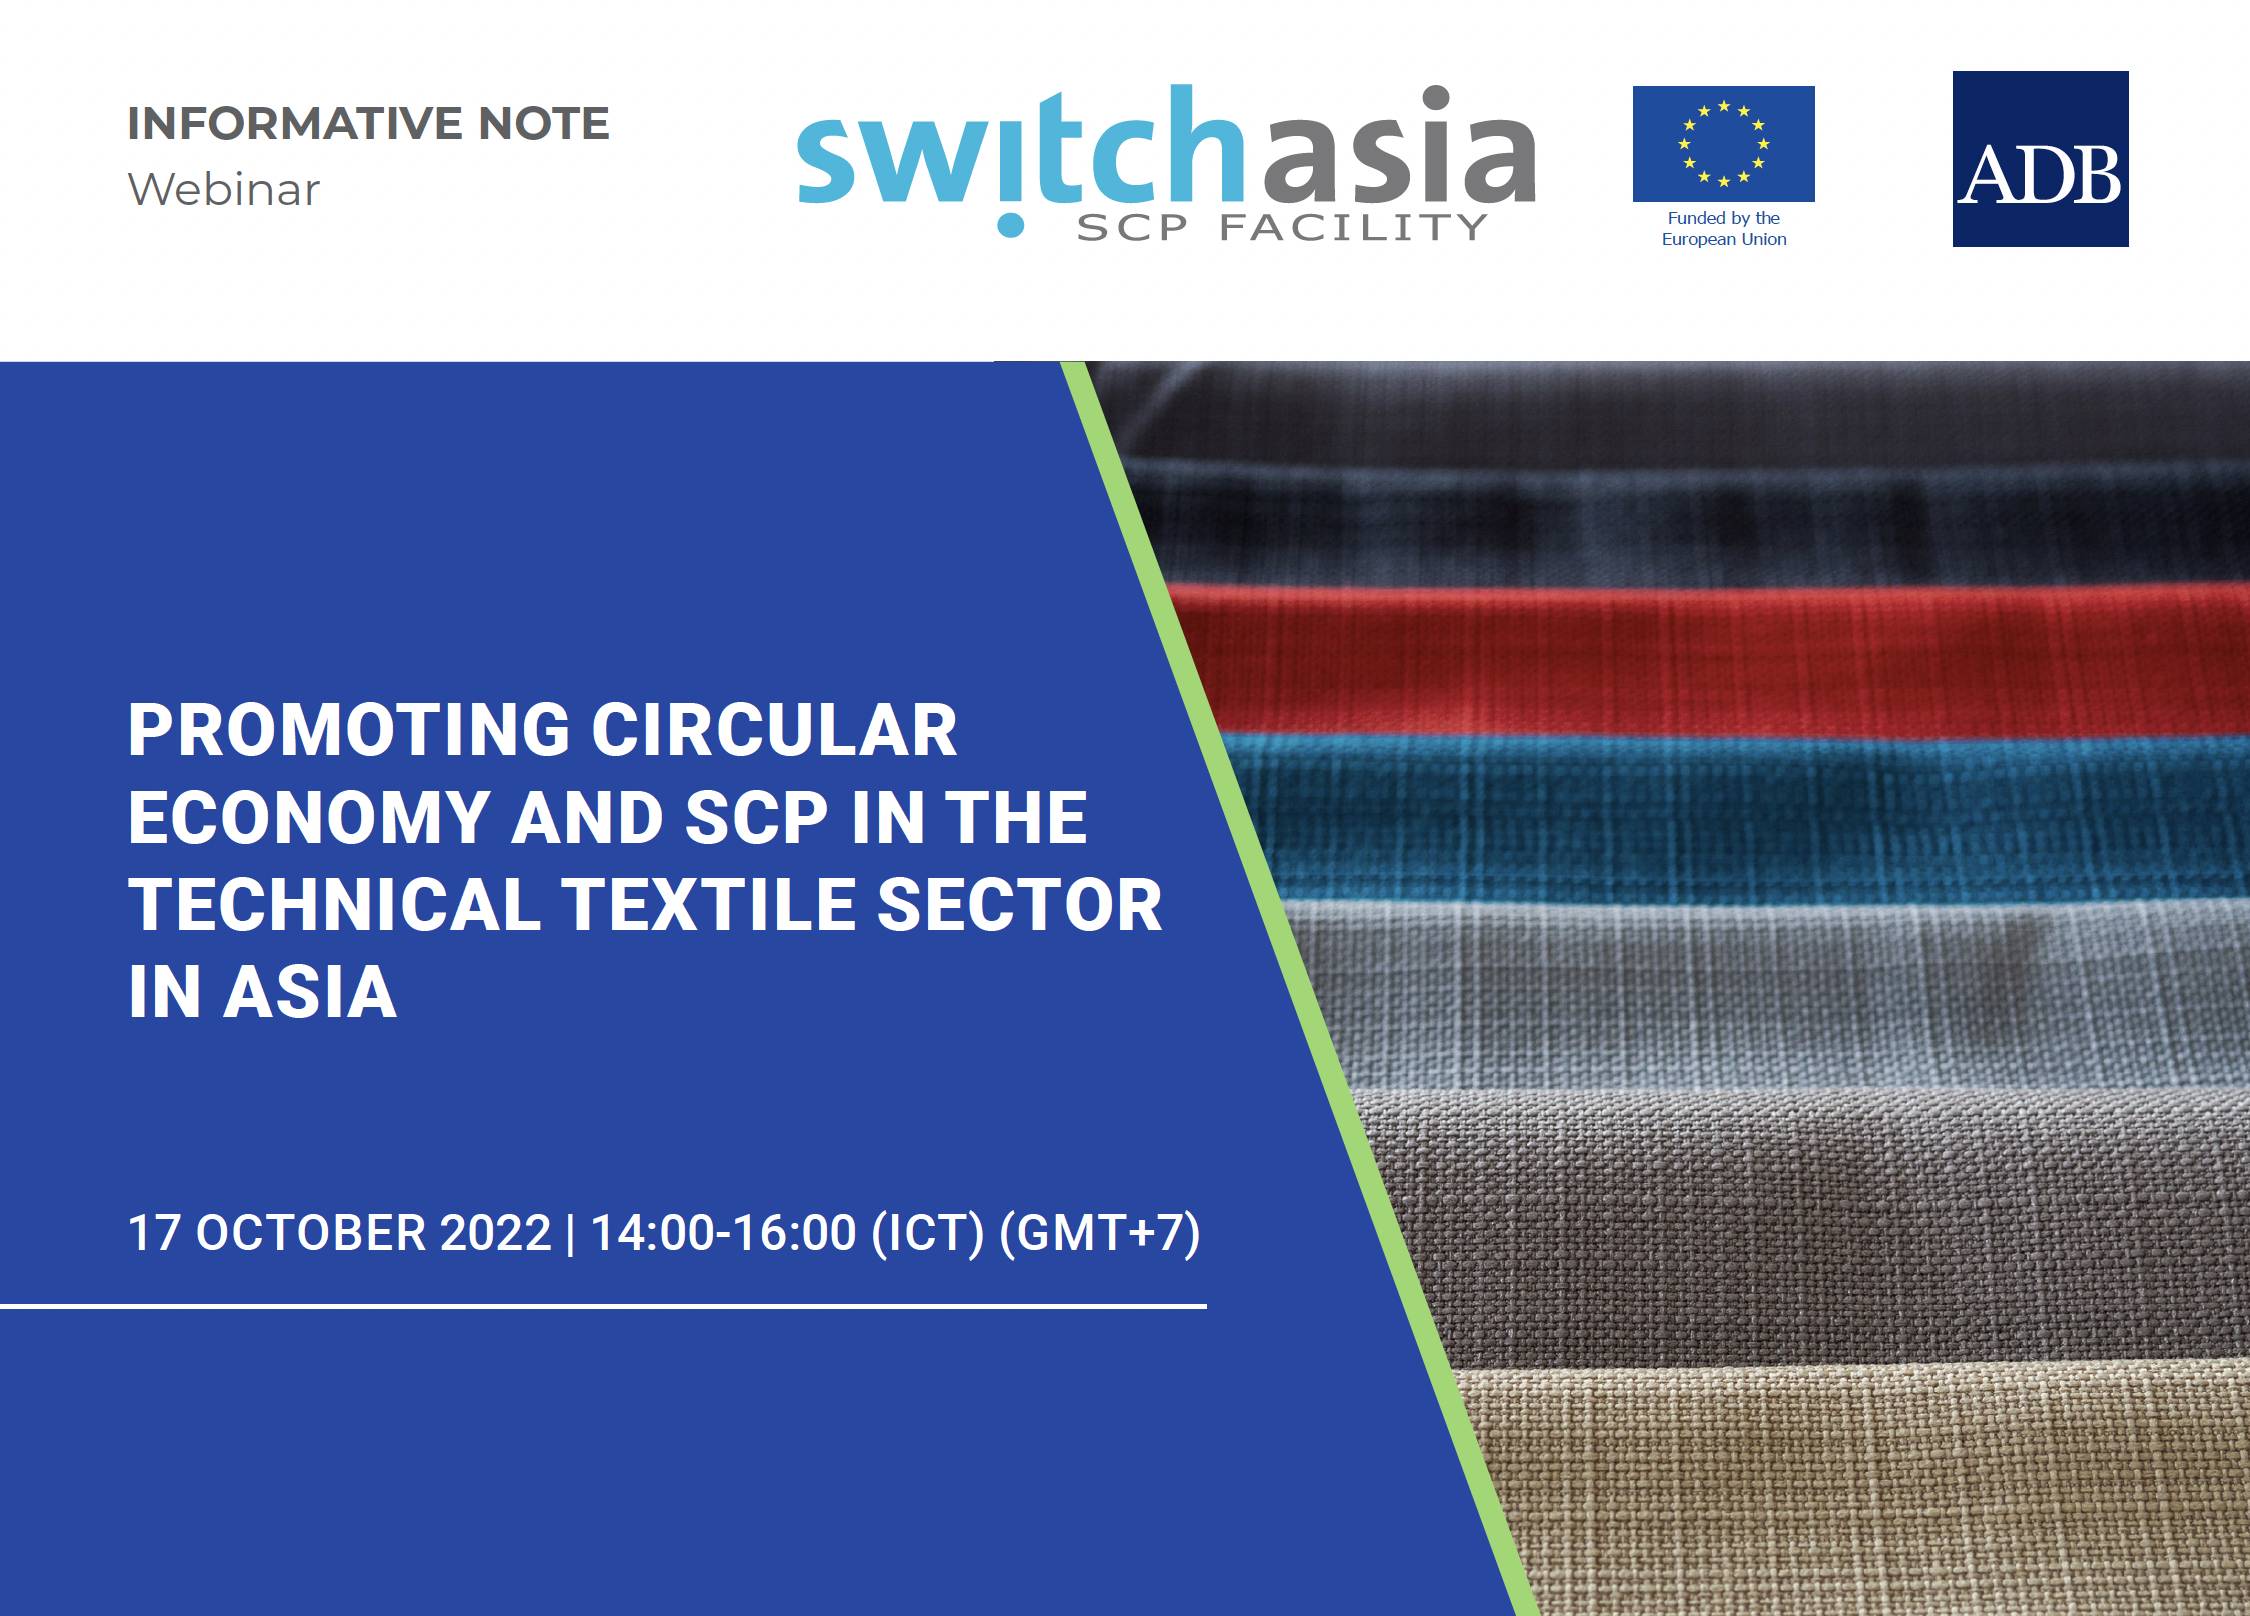 Promoting Circular Economy and SCP in the Technical Textiles Sector in Asia